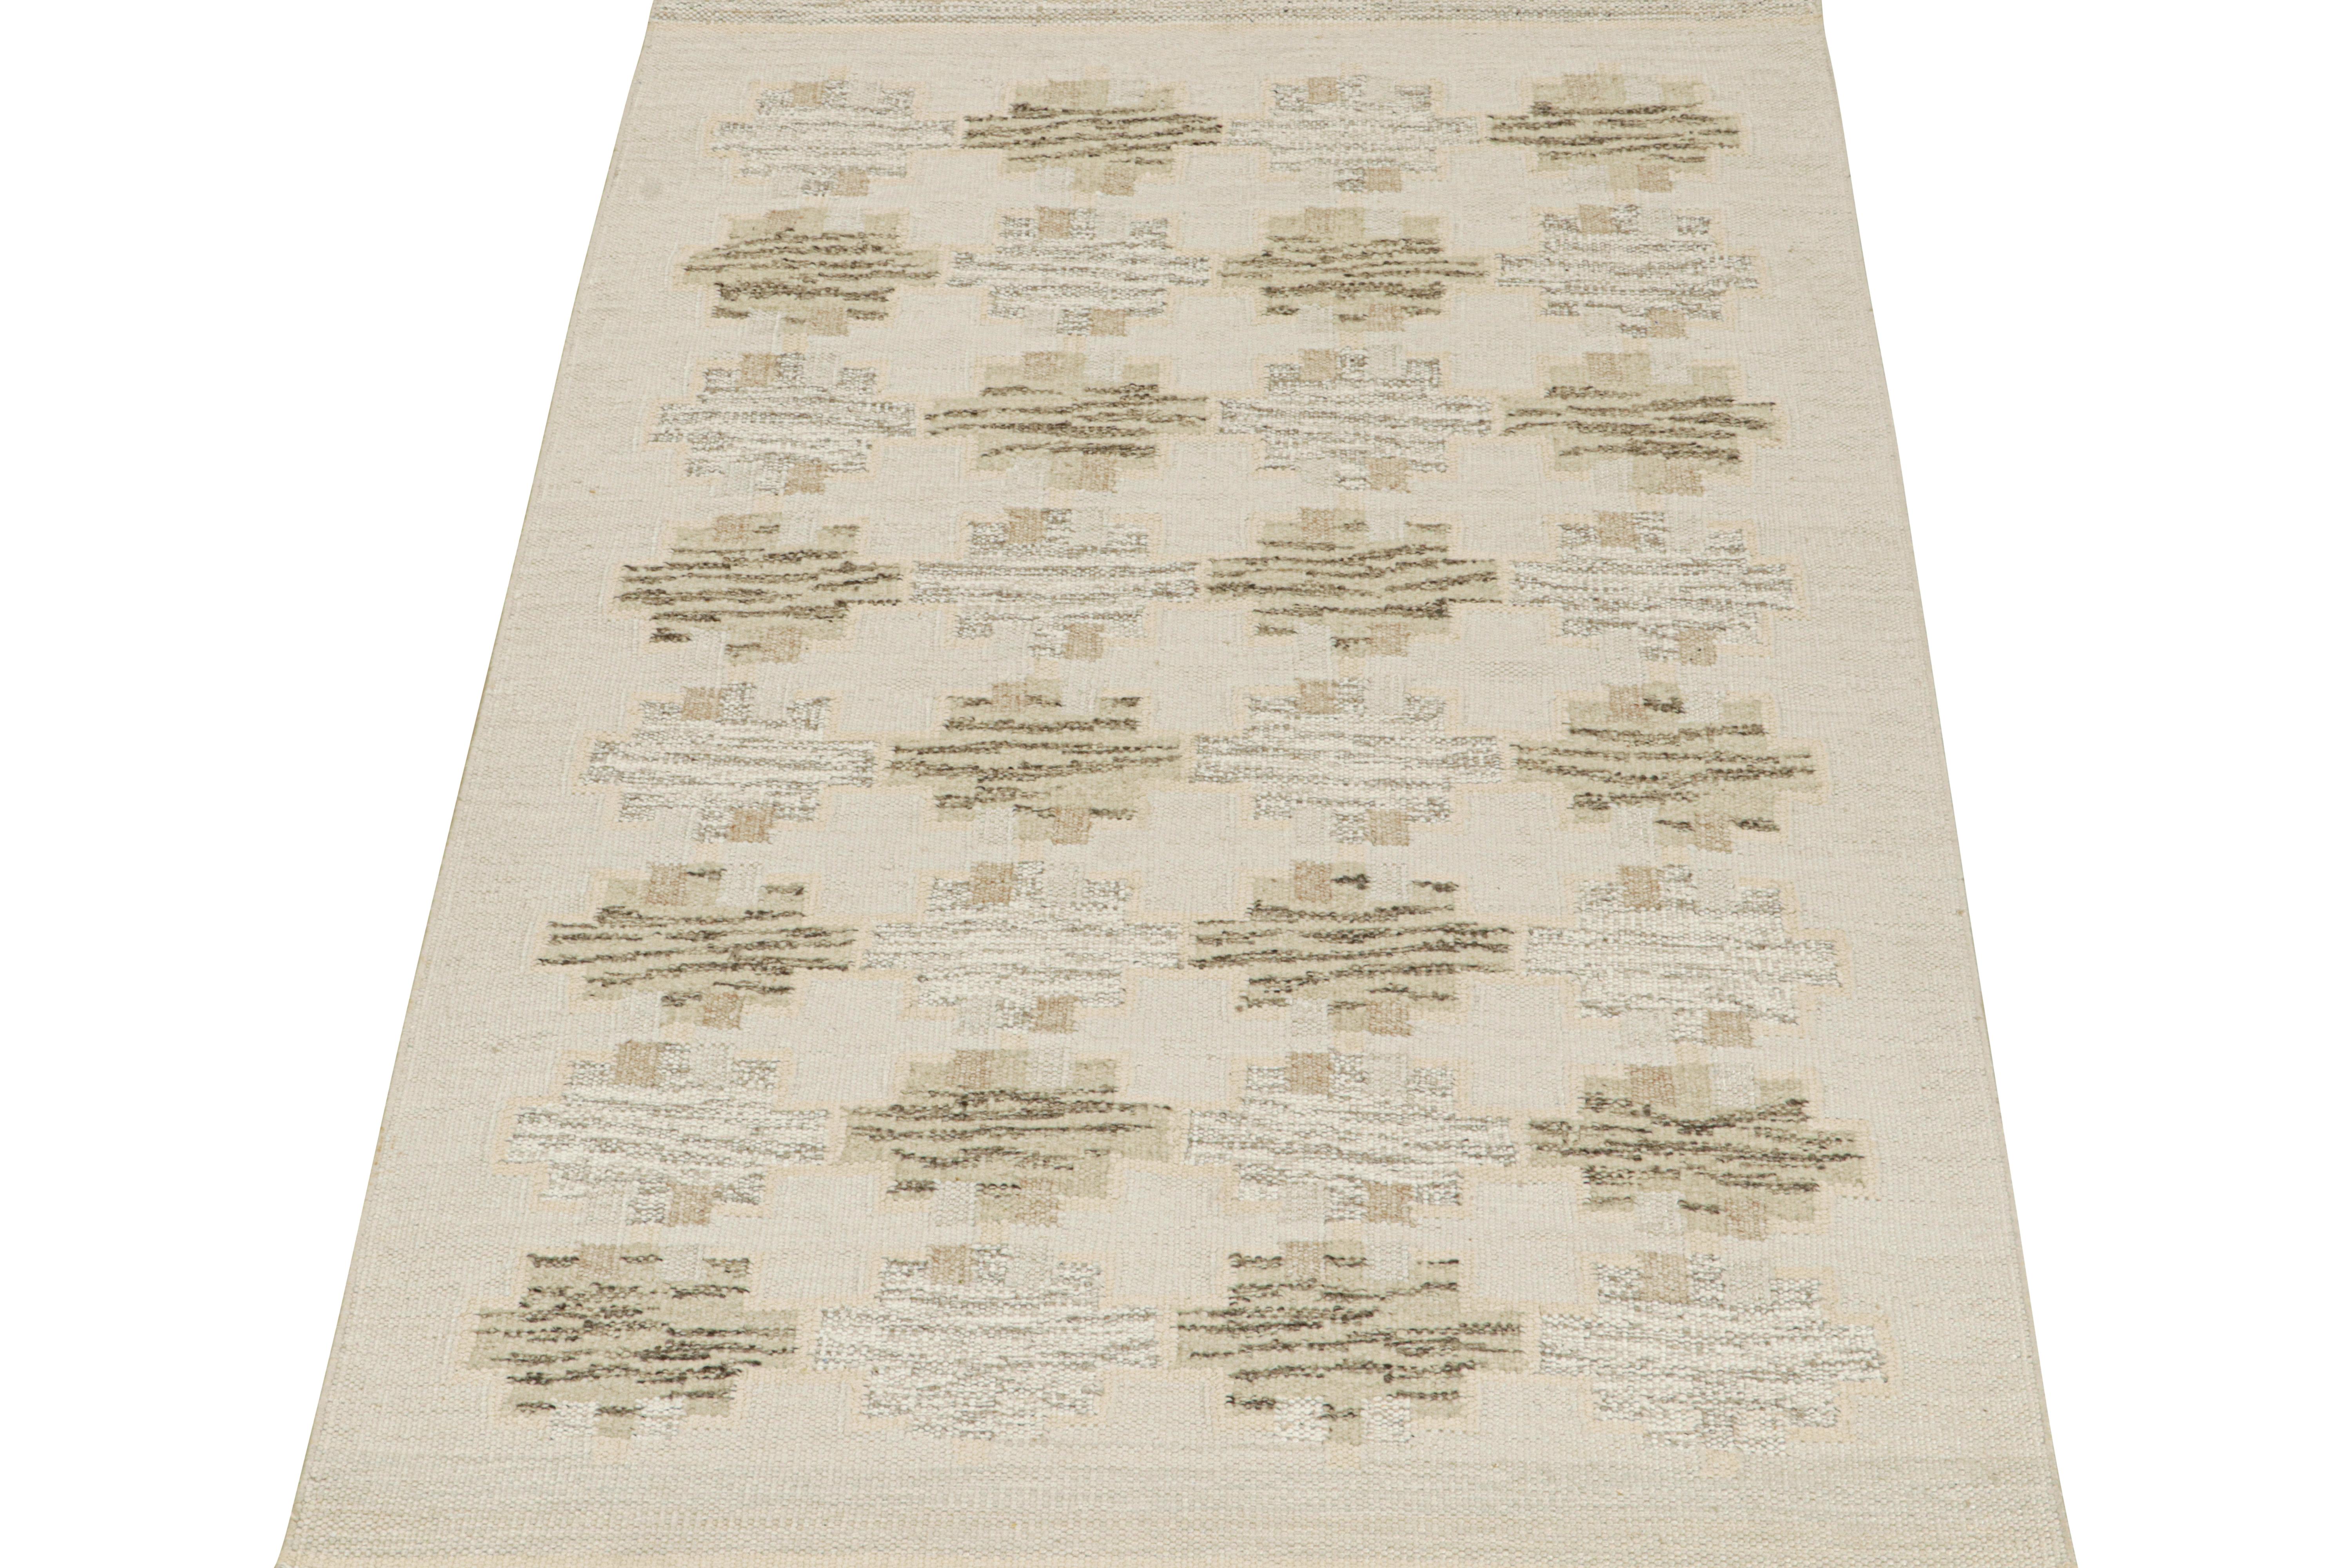 This 5x8 flat weave is a new addition to the Scandinavian Kilim collection by Rug & Kilim. Handwoven in wool and natural yarns, its design reflects a contemporary take on mid-century Rollakans and Swedish Deco style.
On the Design:
This new flat